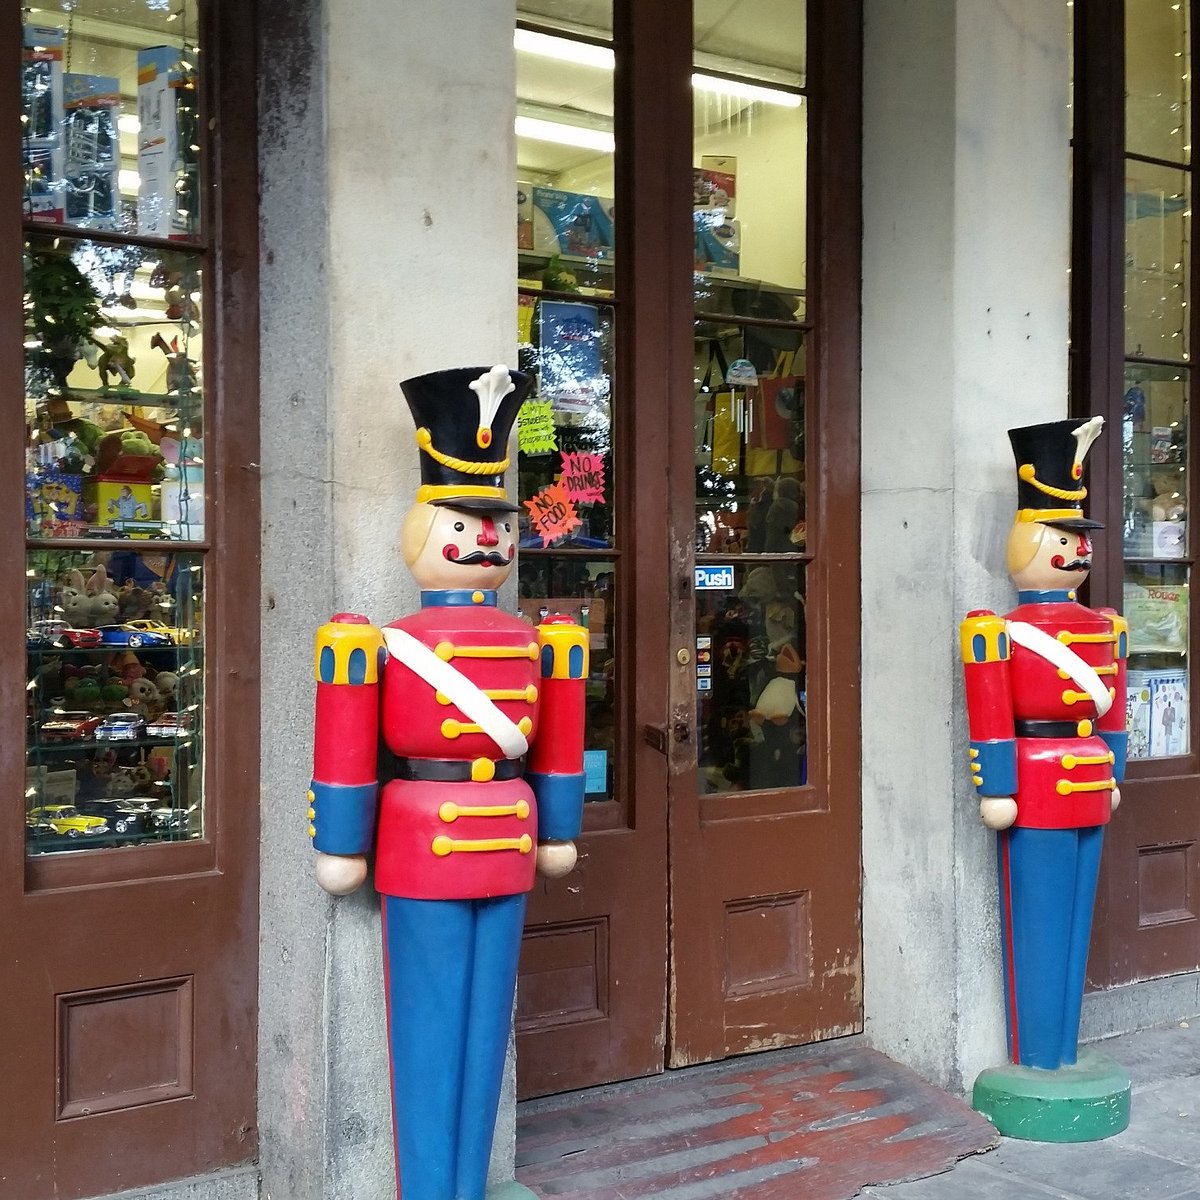 toy store outside